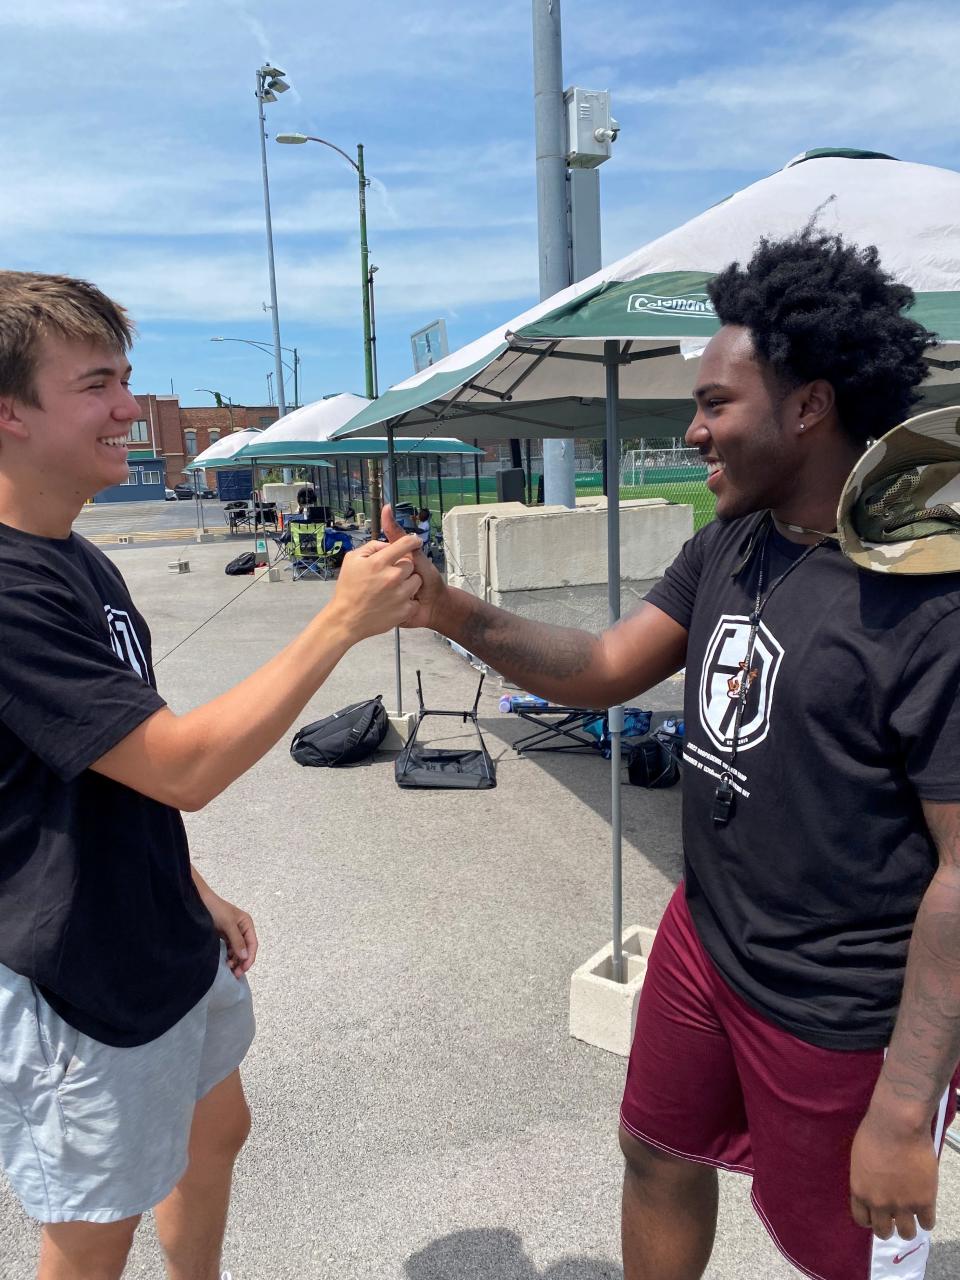 Christian Michaels, a Southern Methodist University student, and Terry Gordon, a Marquette University student, return to Chicago in the summer to help coach and mentor youth.